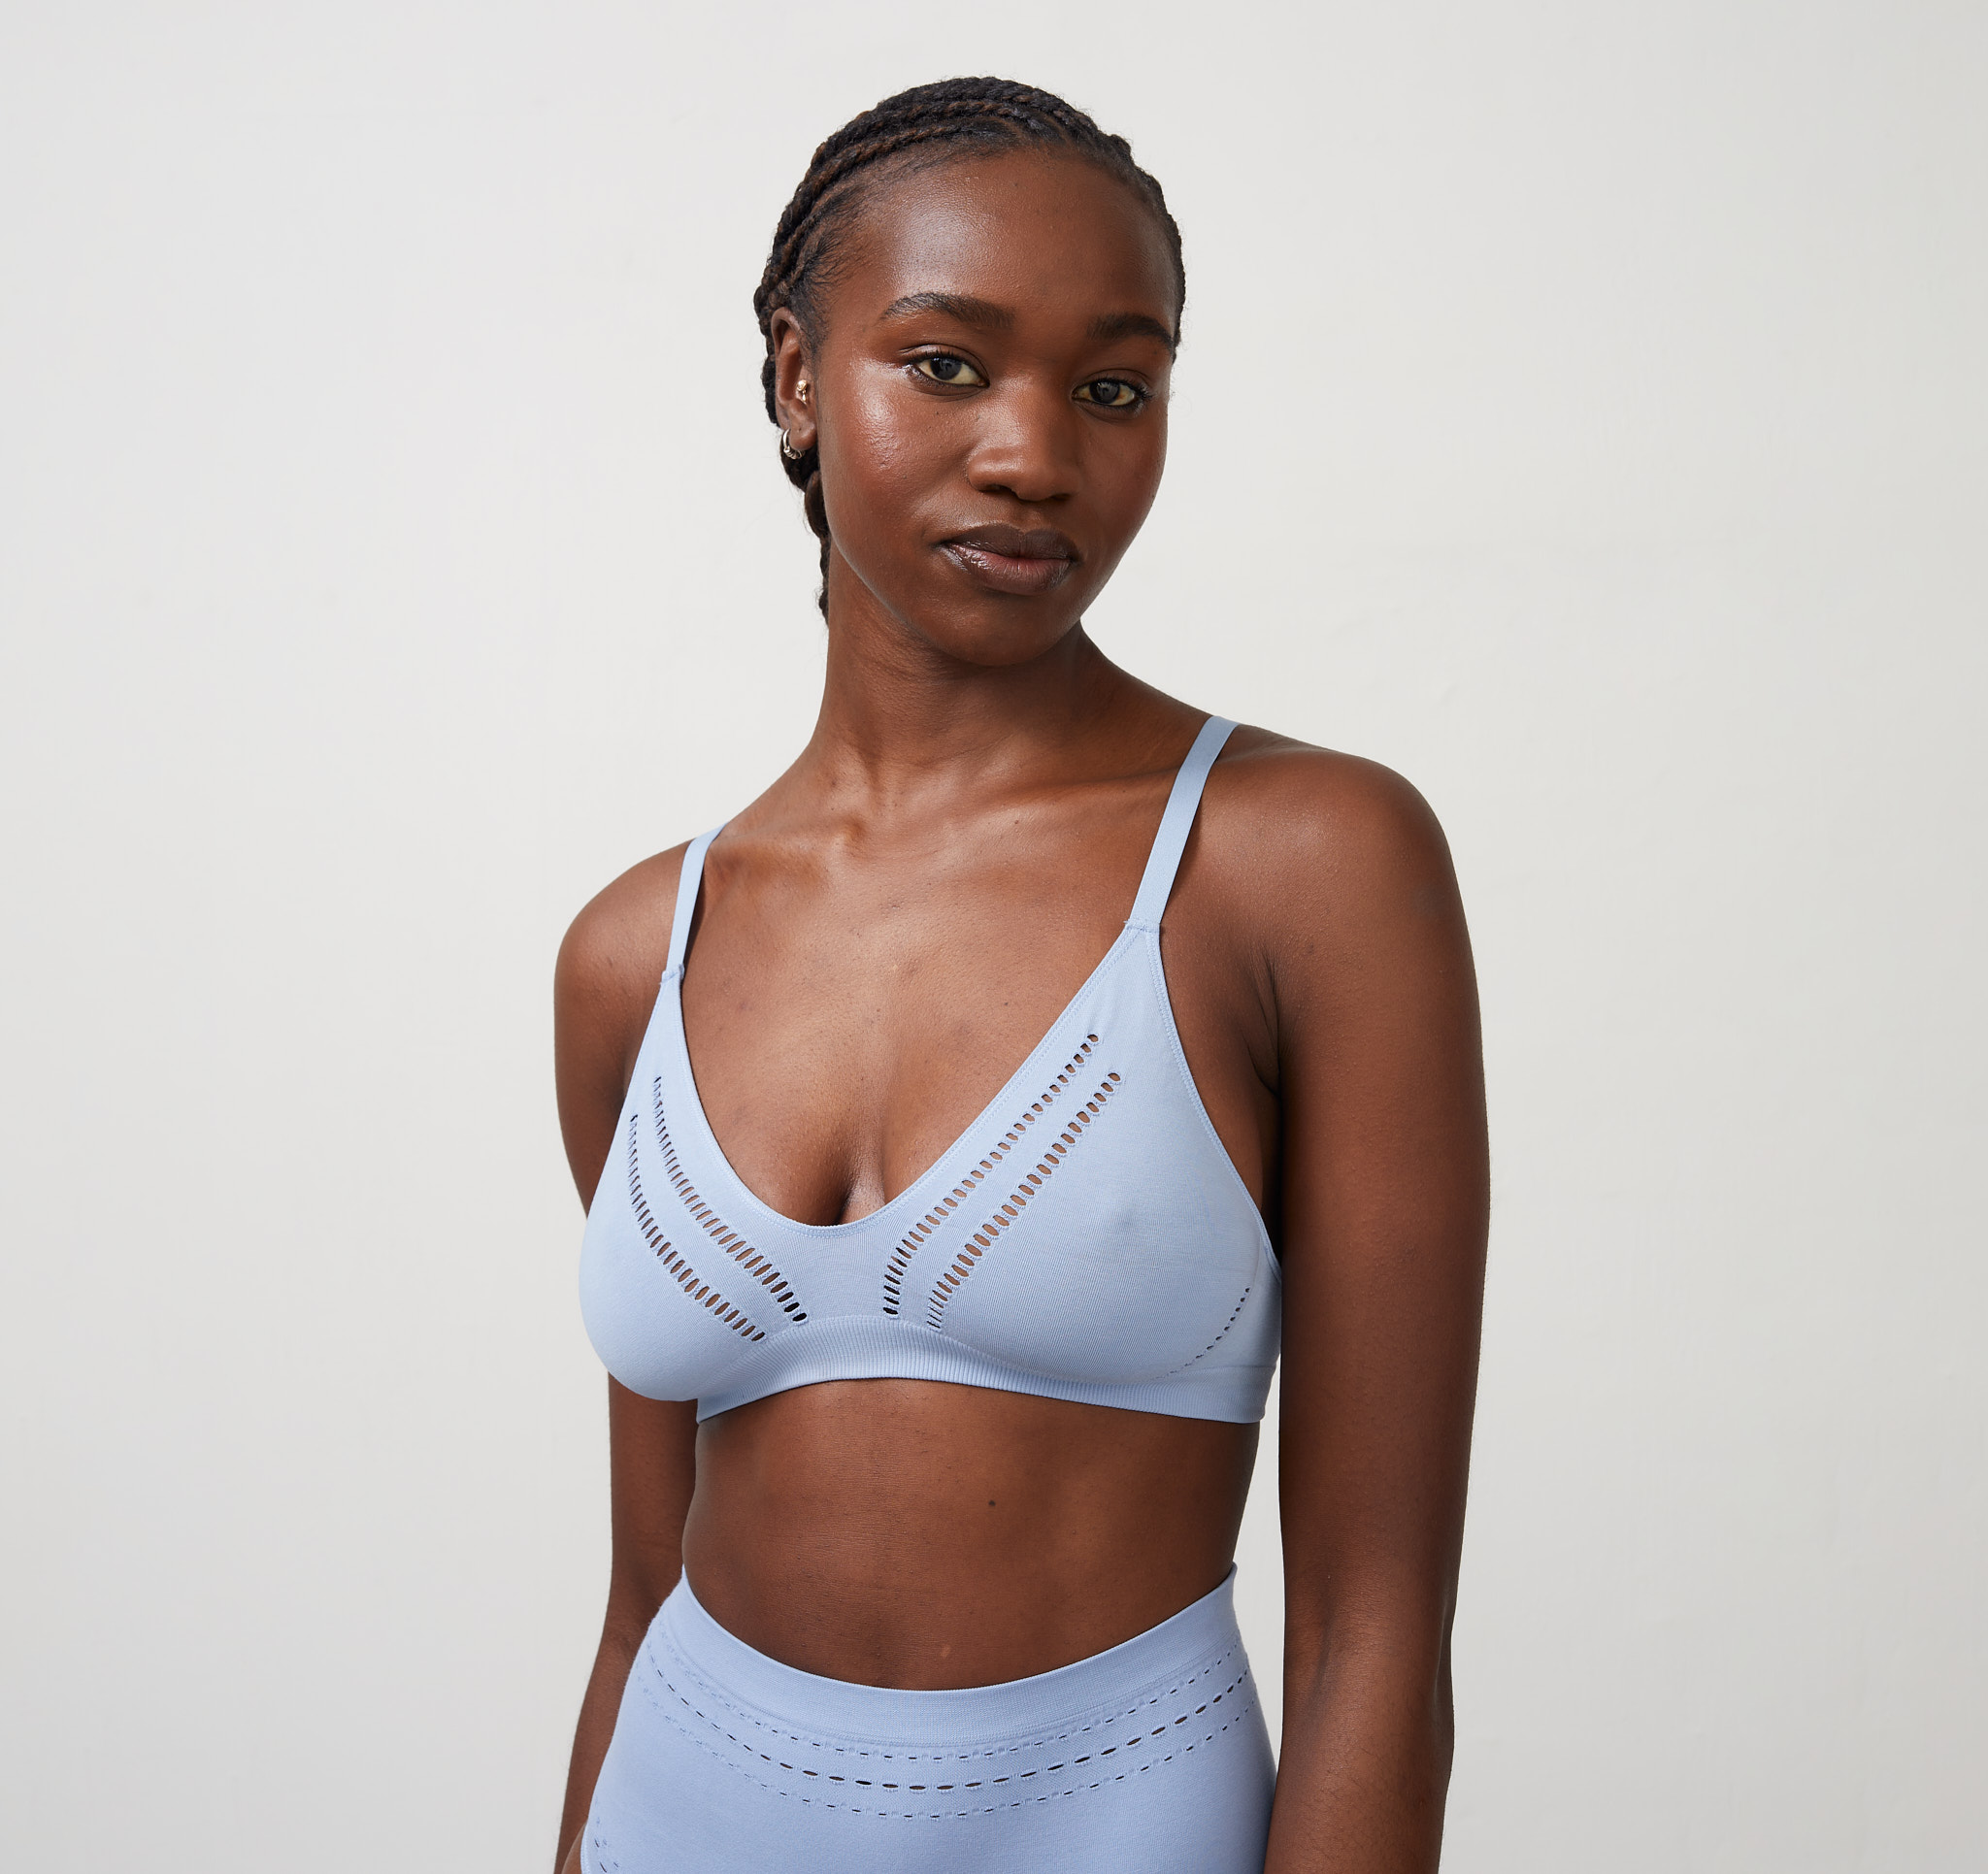 Buy Organic Cotton Seamless Starter Pack, Fast Delivery